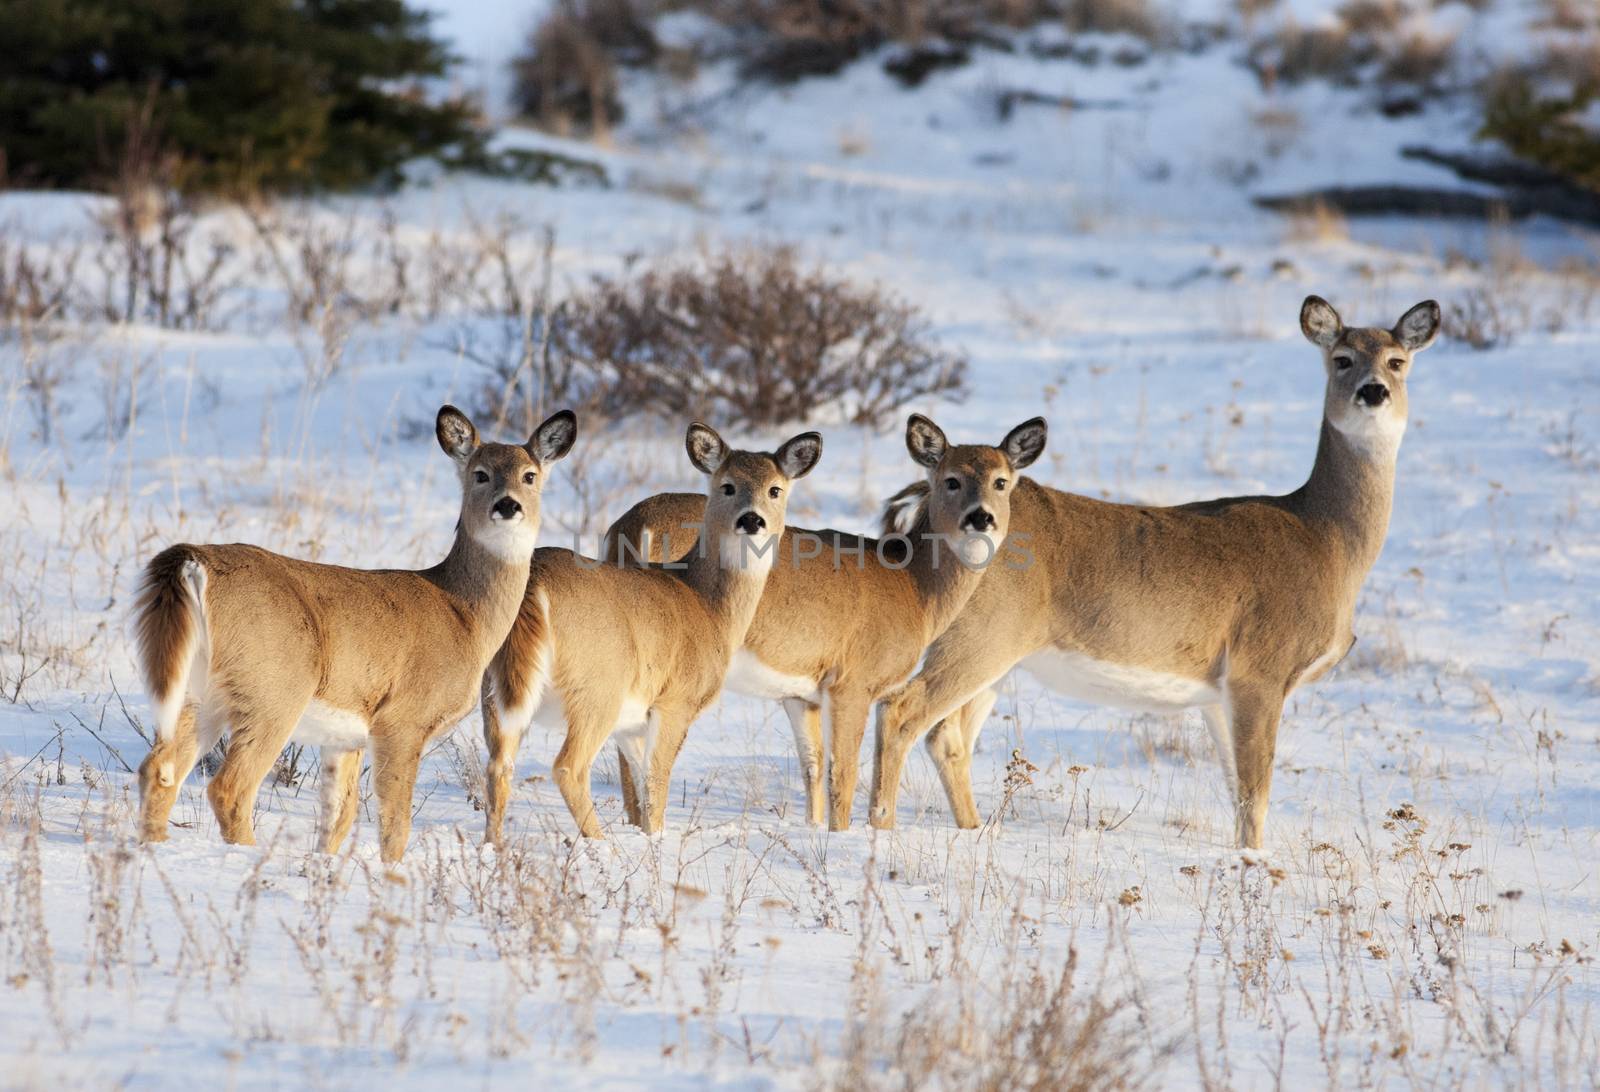 White Tail Deer, in early evening light, in the Cypress Hills, Alberta, Canada.  Mother and three babies.